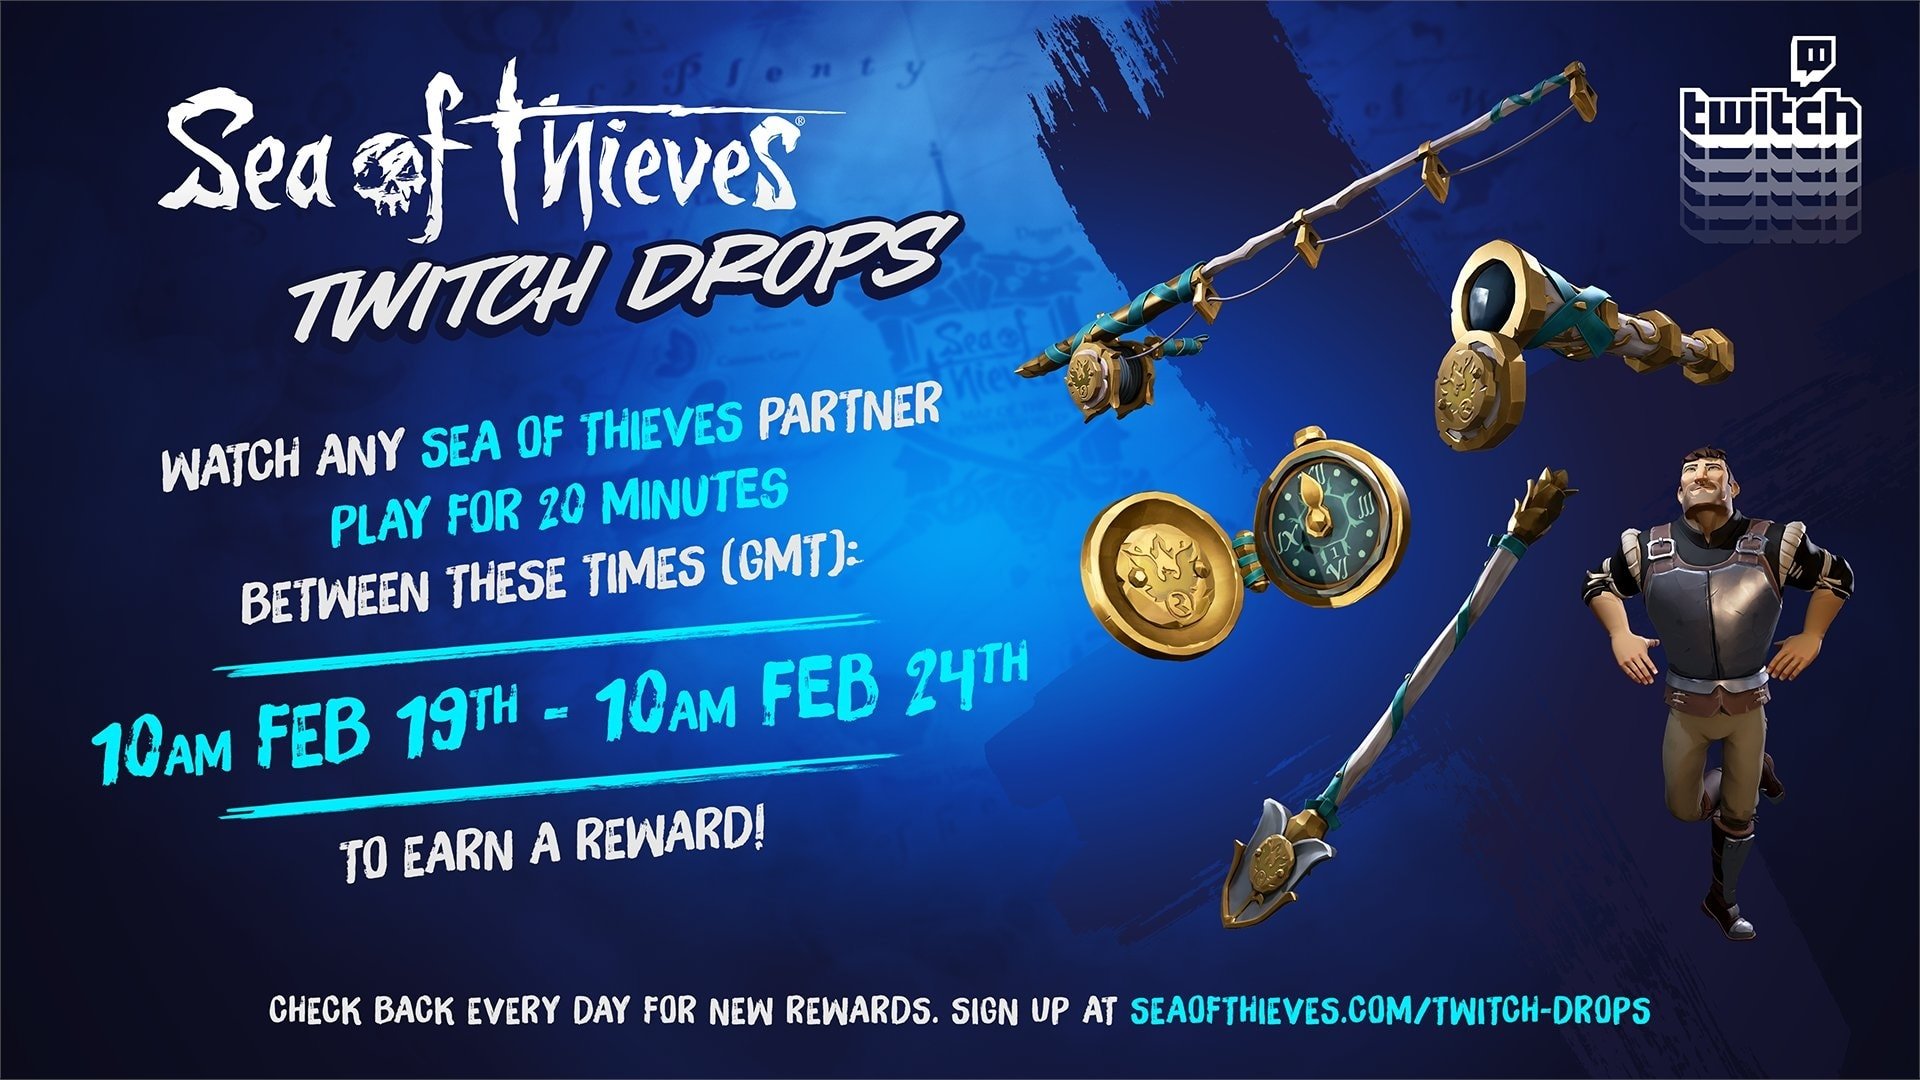 Sea of Thieves Twitch Drops How to claim, items list, and more